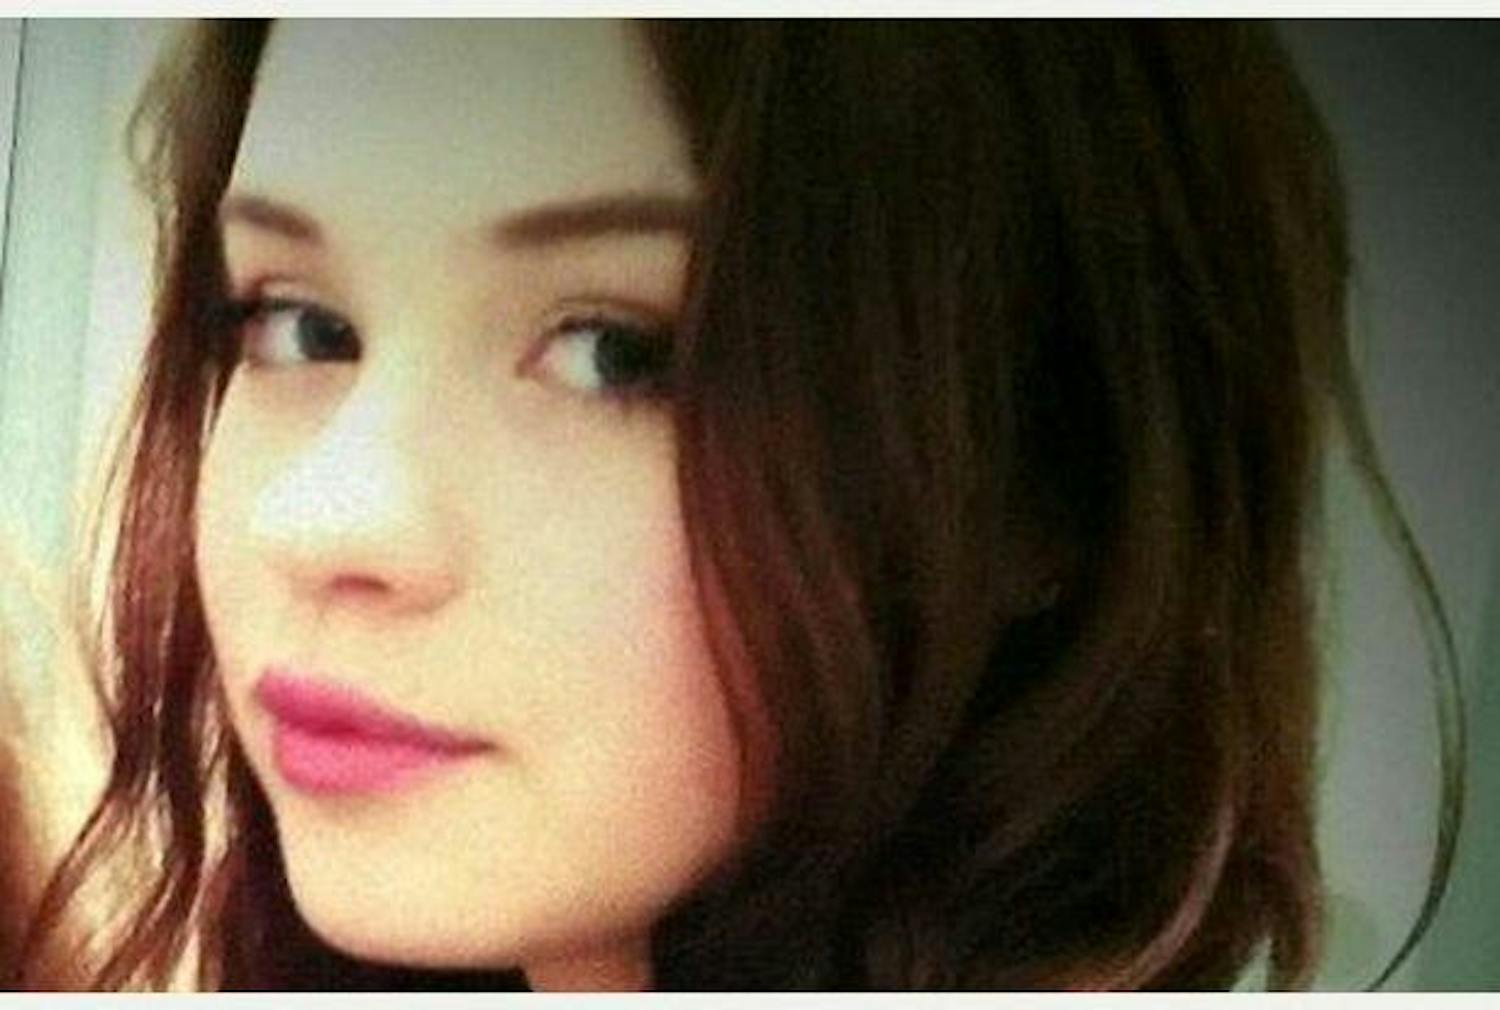 66 - A Family Destroyed: The murder of Becky Watts